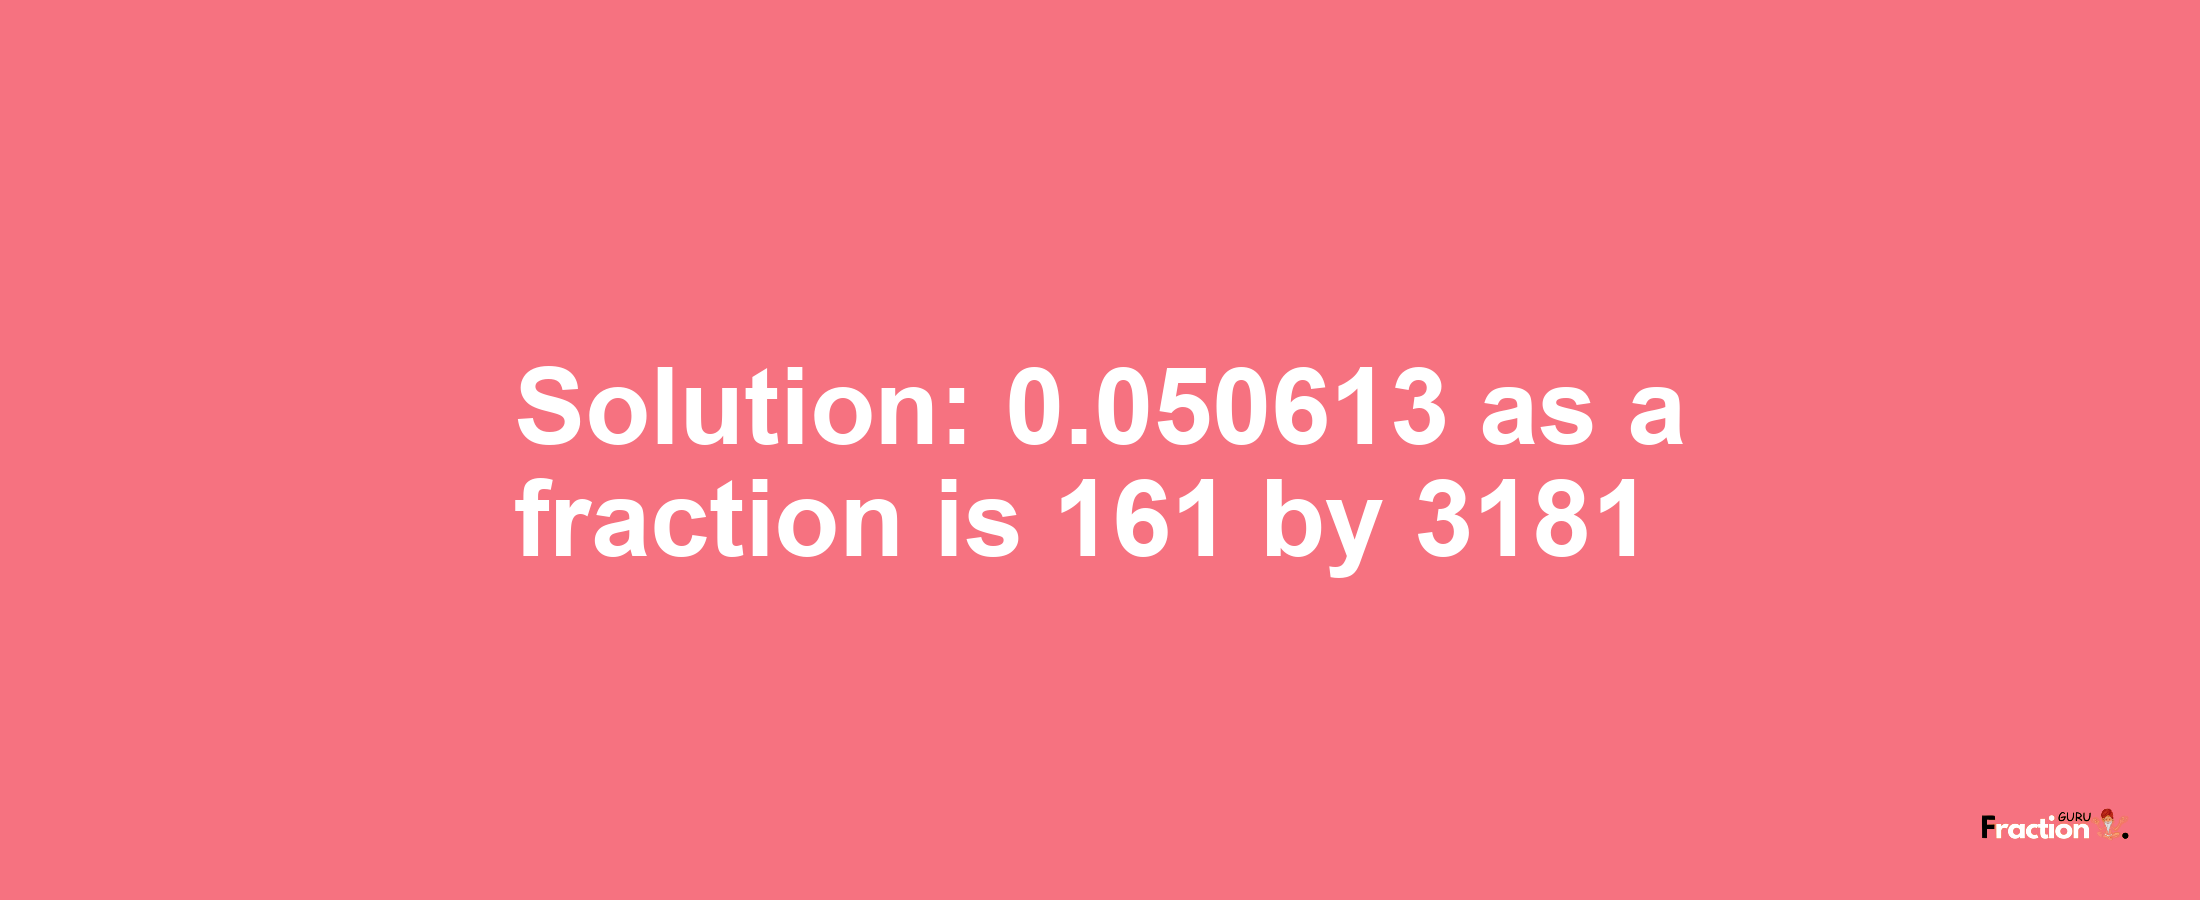 Solution:0.050613 as a fraction is 161/3181